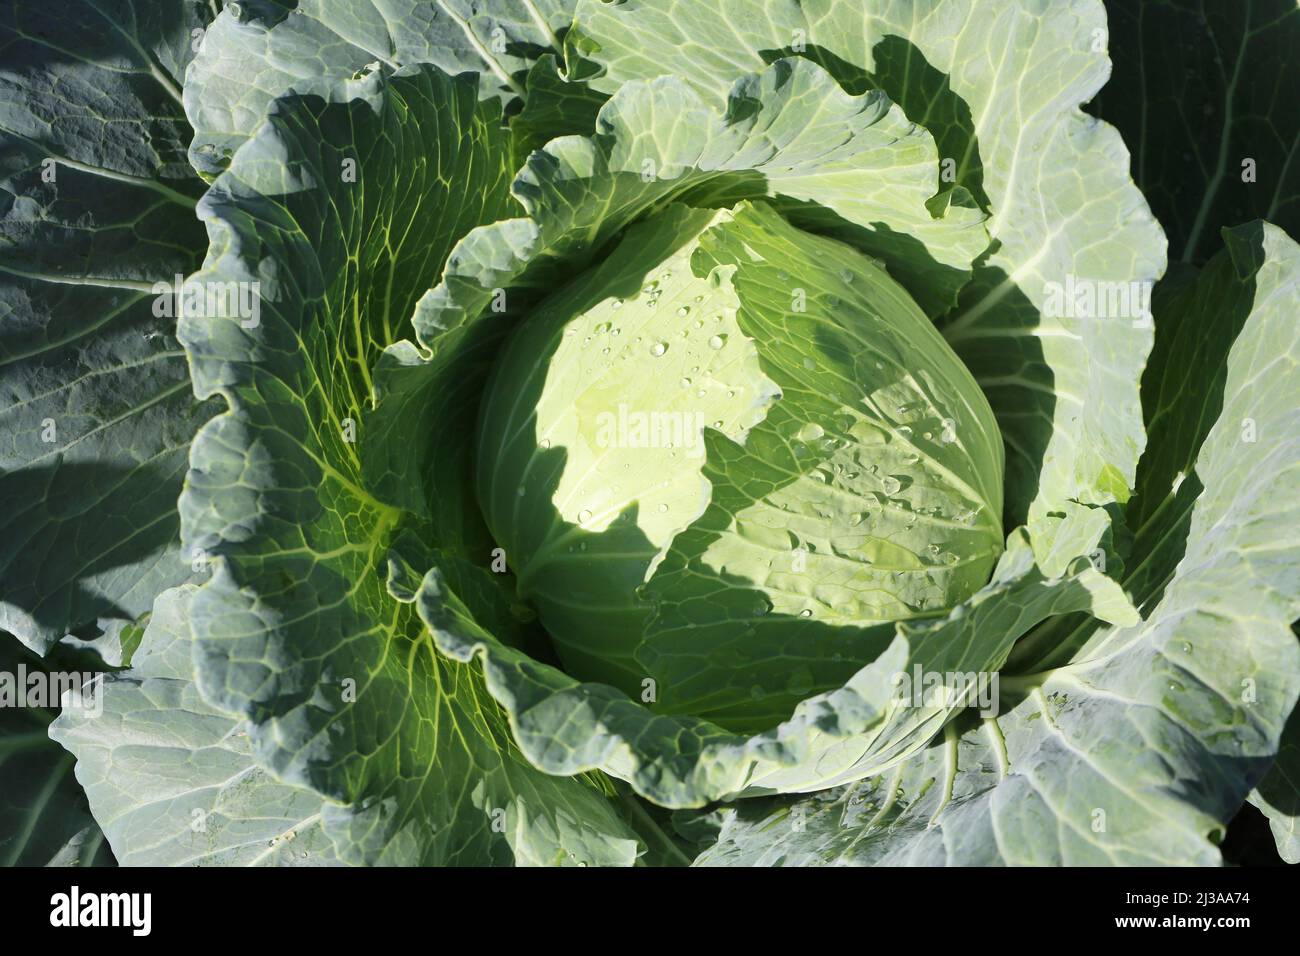 Fresh cabbage of Vegetable garden,Vegetables that provide high nutritional value. Stock Photo